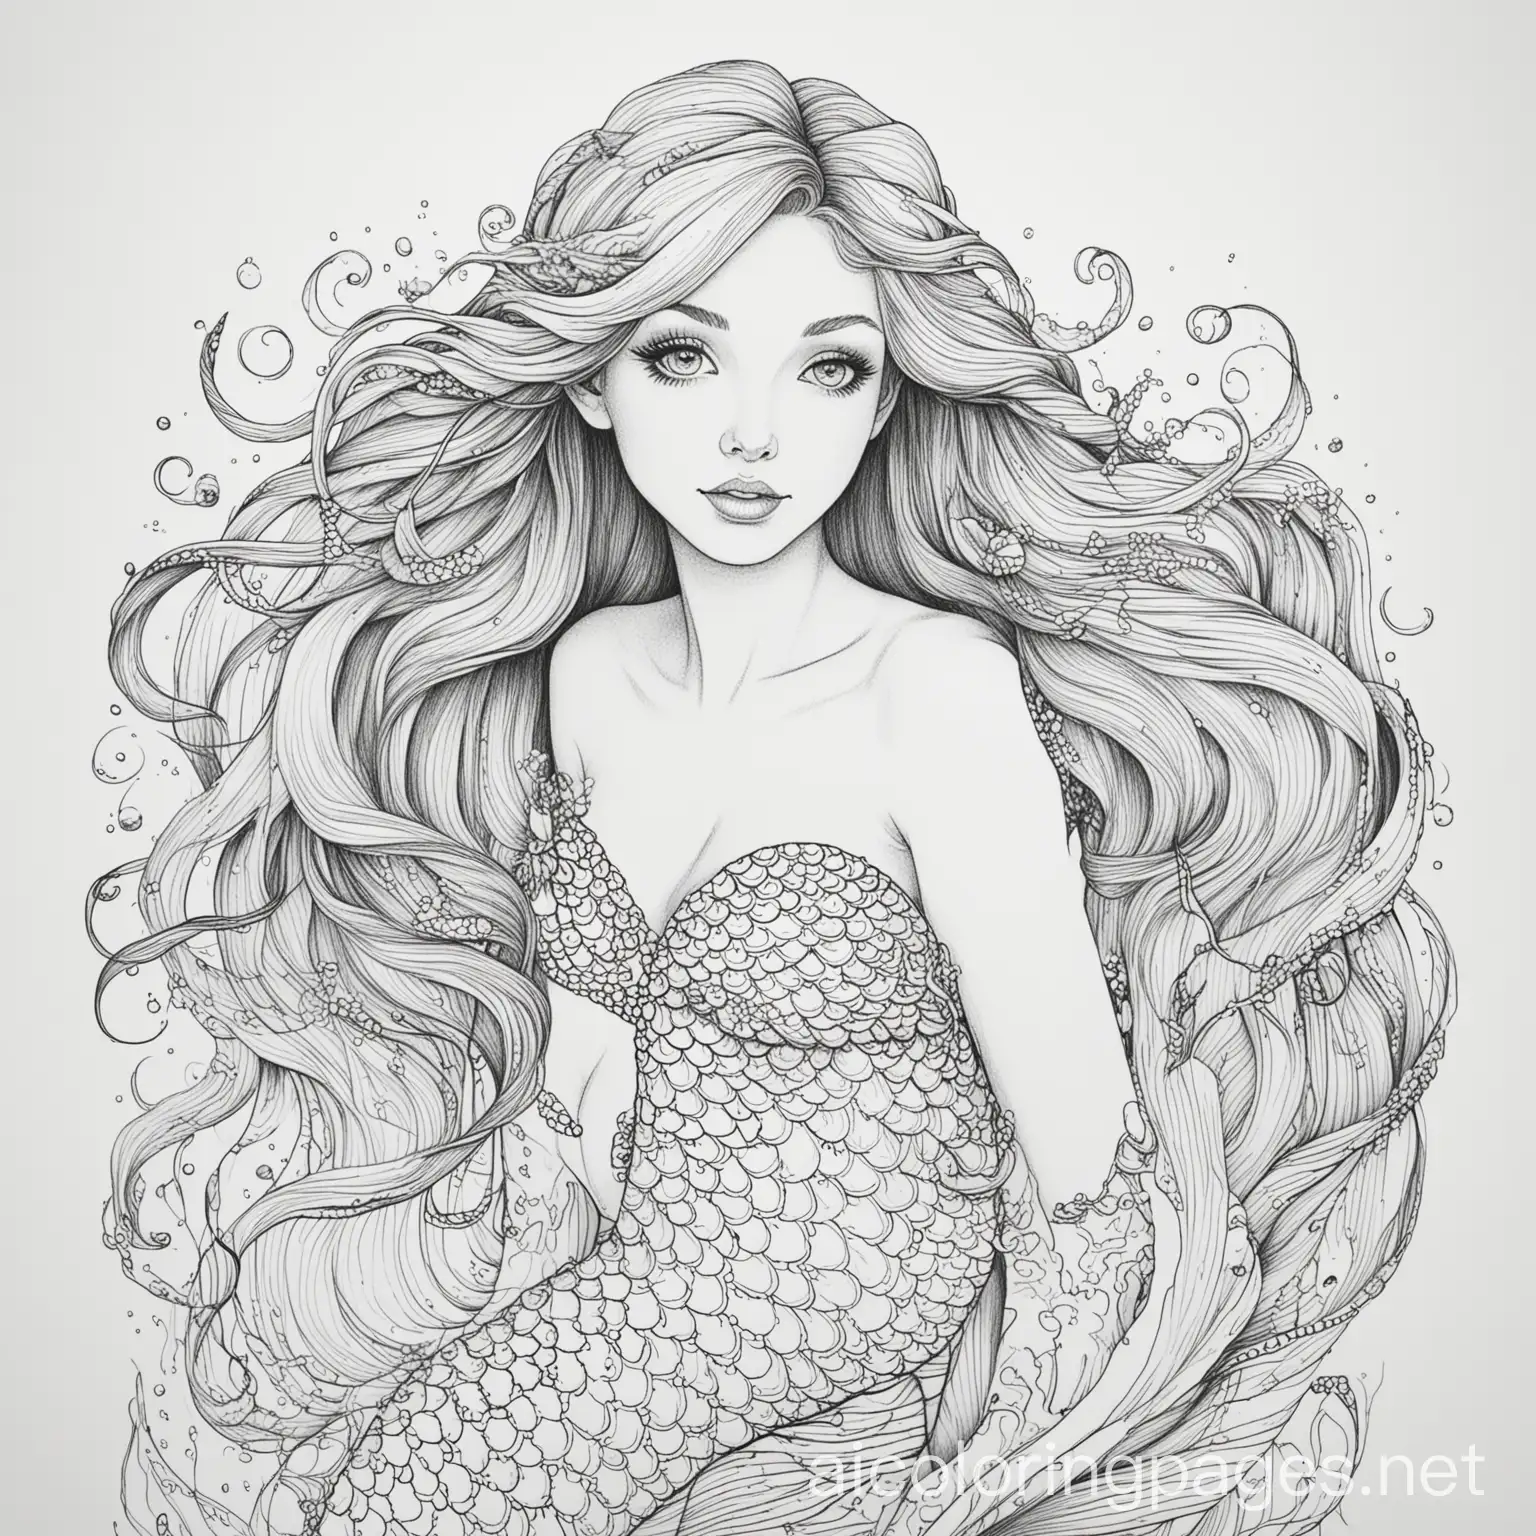 mermaid, Coloring Page, black and white, line art, white background, Simplicity, Ample White Space. The background of the coloring page is plain white to make it easy for young children to color within the lines. The outlines of all the subjects are easy to distinguish, making it simple for kids to color without too much difficulty